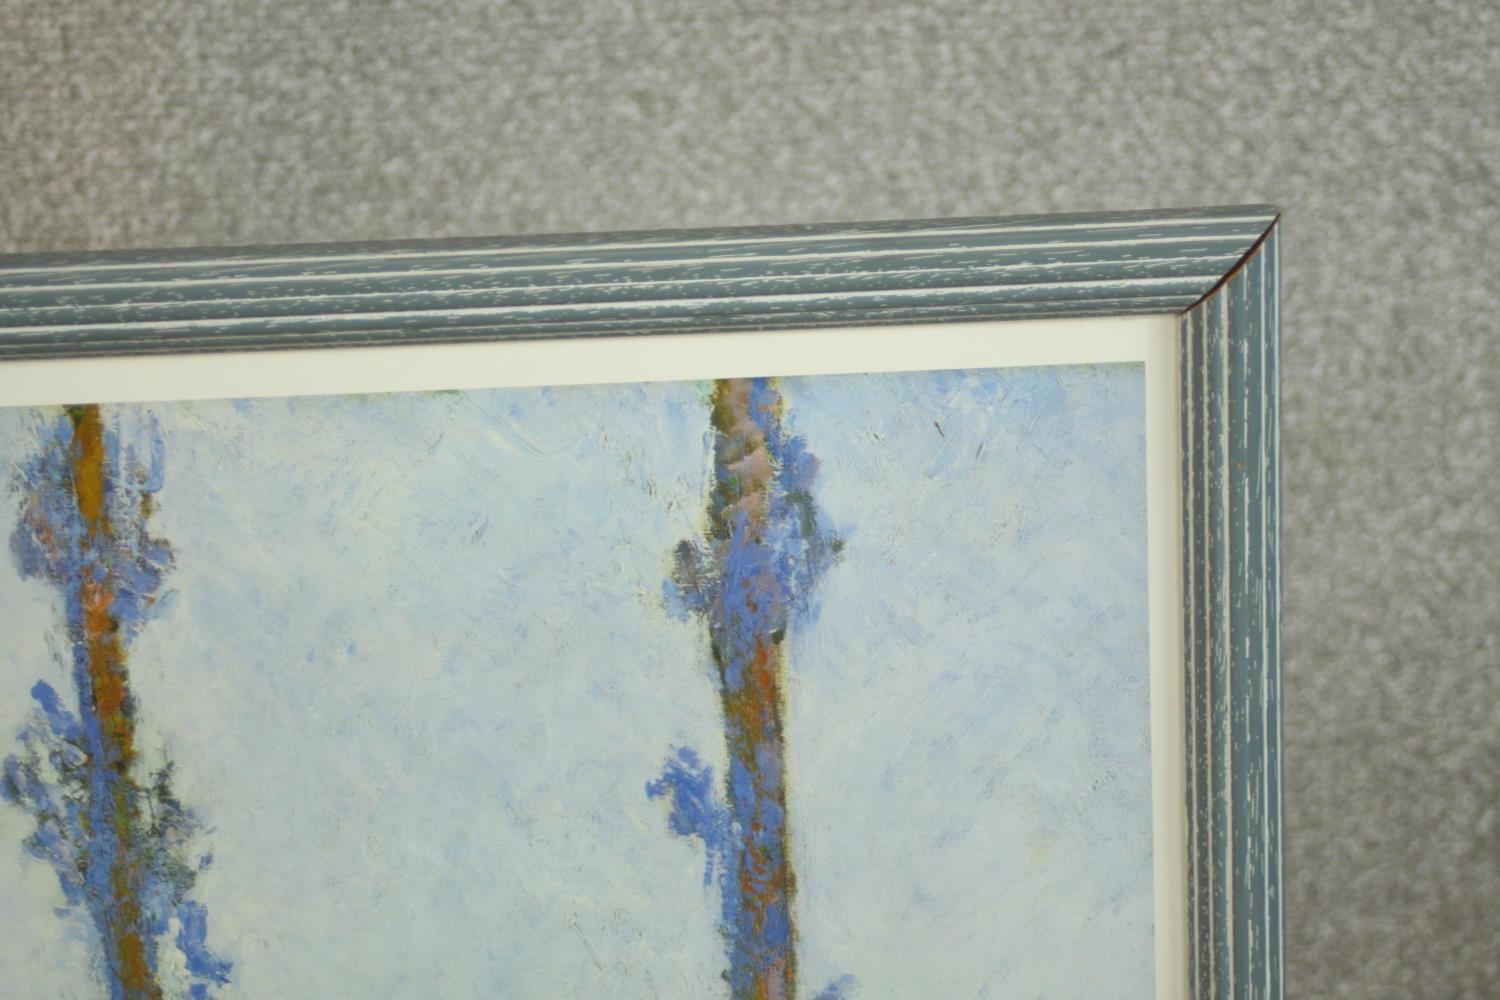 Monet's Years at Giverny, a mid 20th century exhibition poster from the Metropolitan Museum of Art - Image 5 of 6